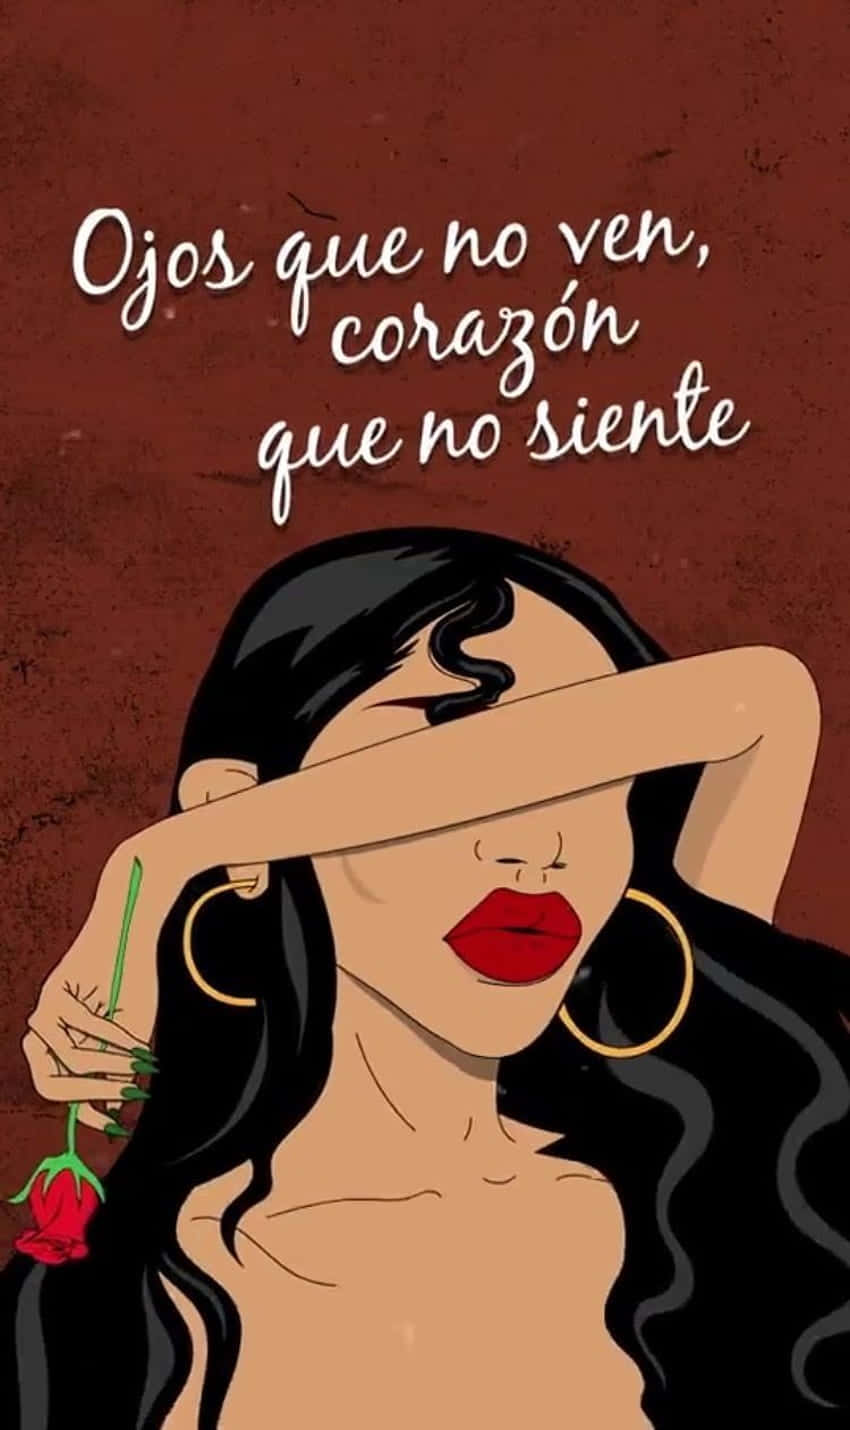 Spanish Proverb Illustration Woman Covering Eyes Wallpaper